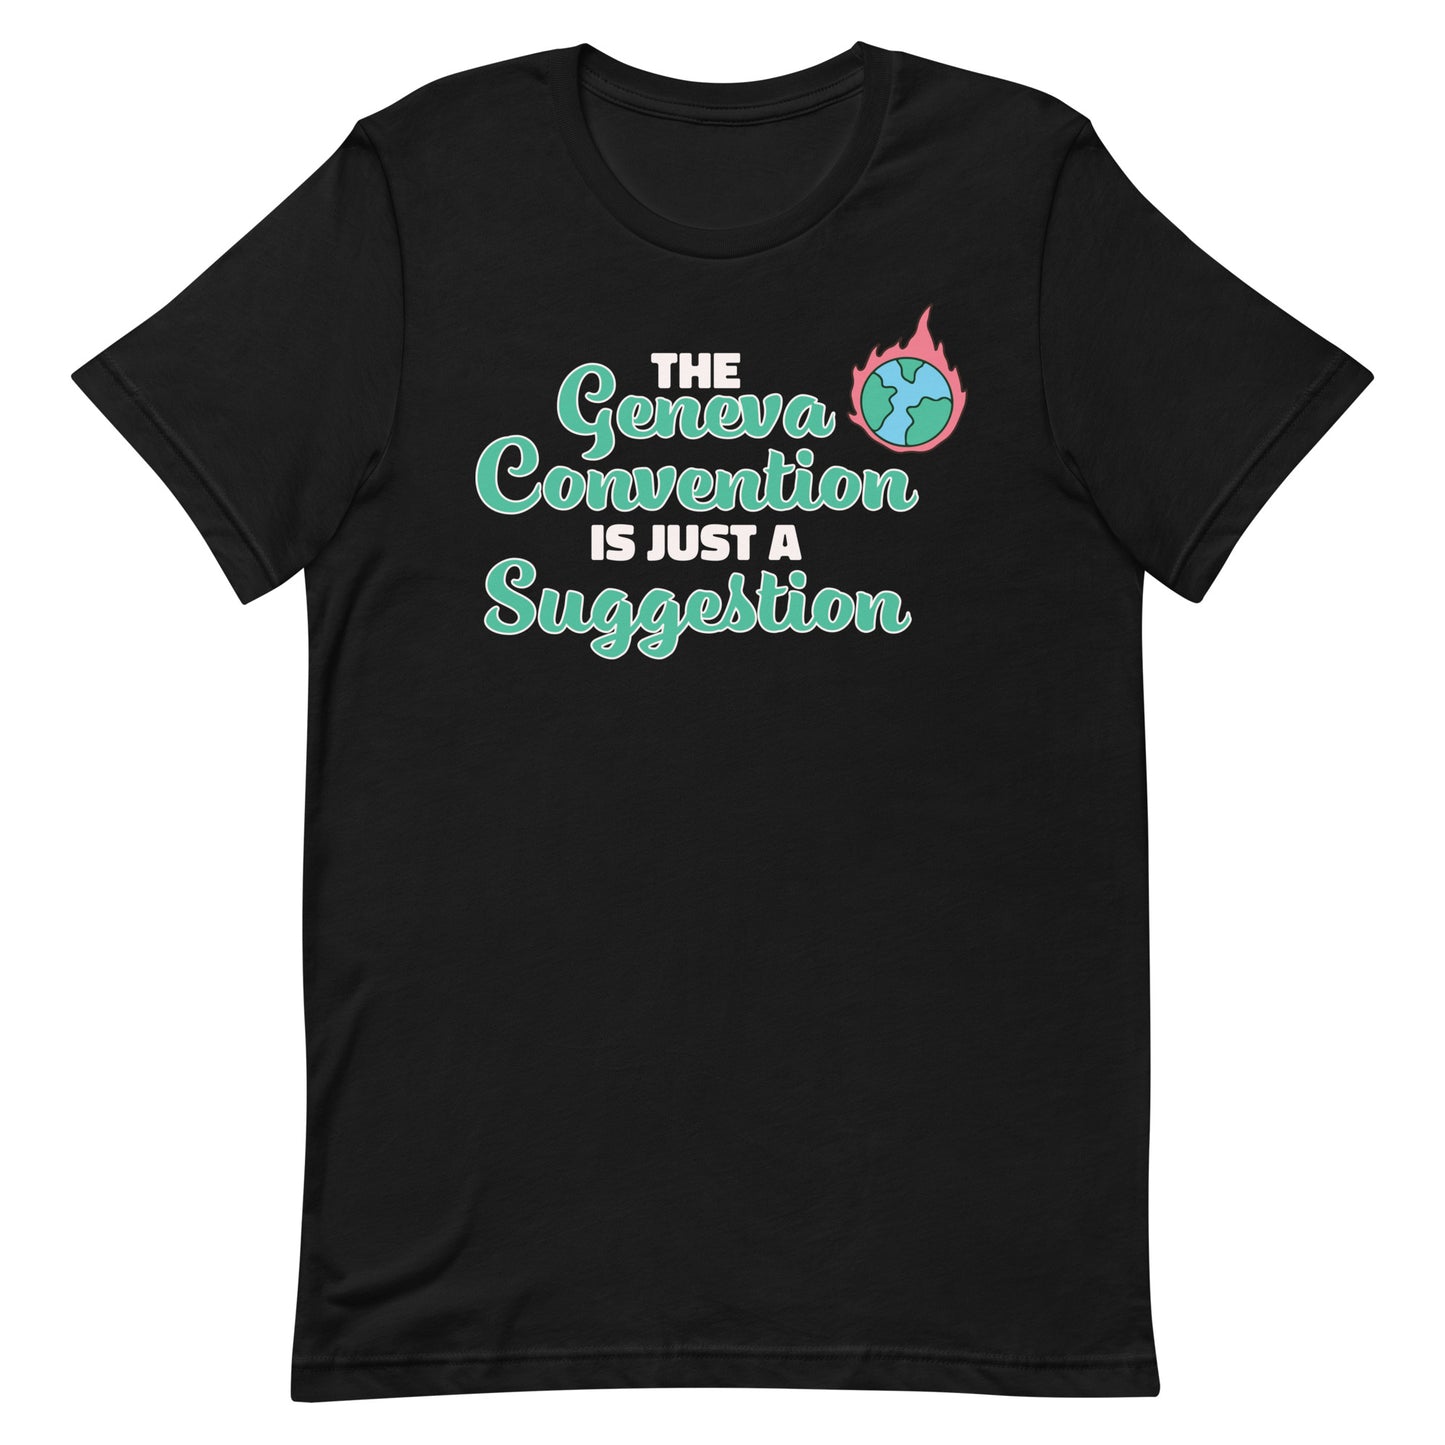 The Geneva Convention is Just a Suggestion Unisex t-shirt